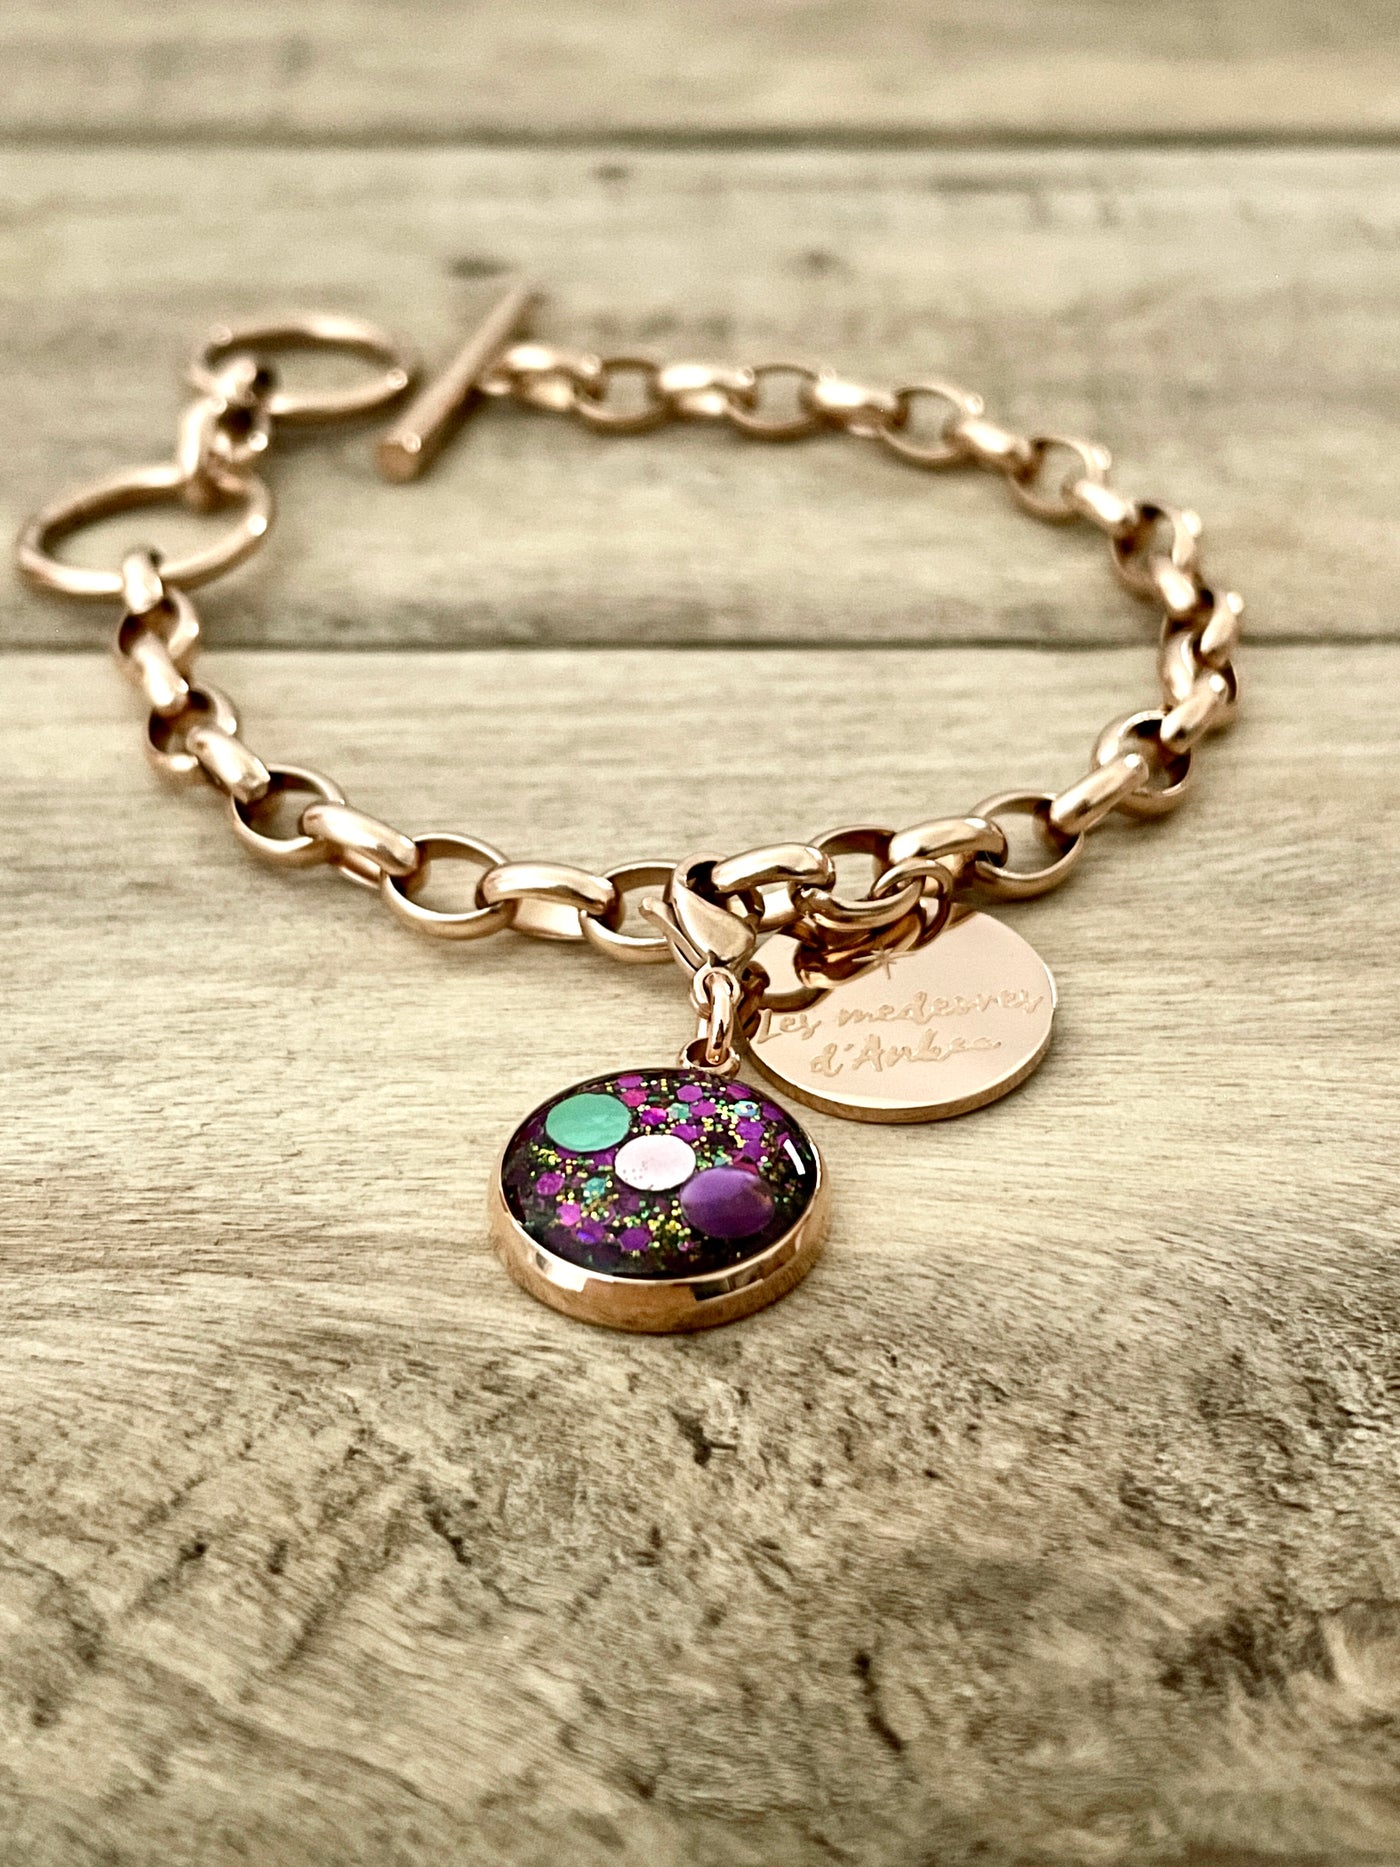 Medeore rose gold charm Wound of the soul: Humiliation (charm sold alone)